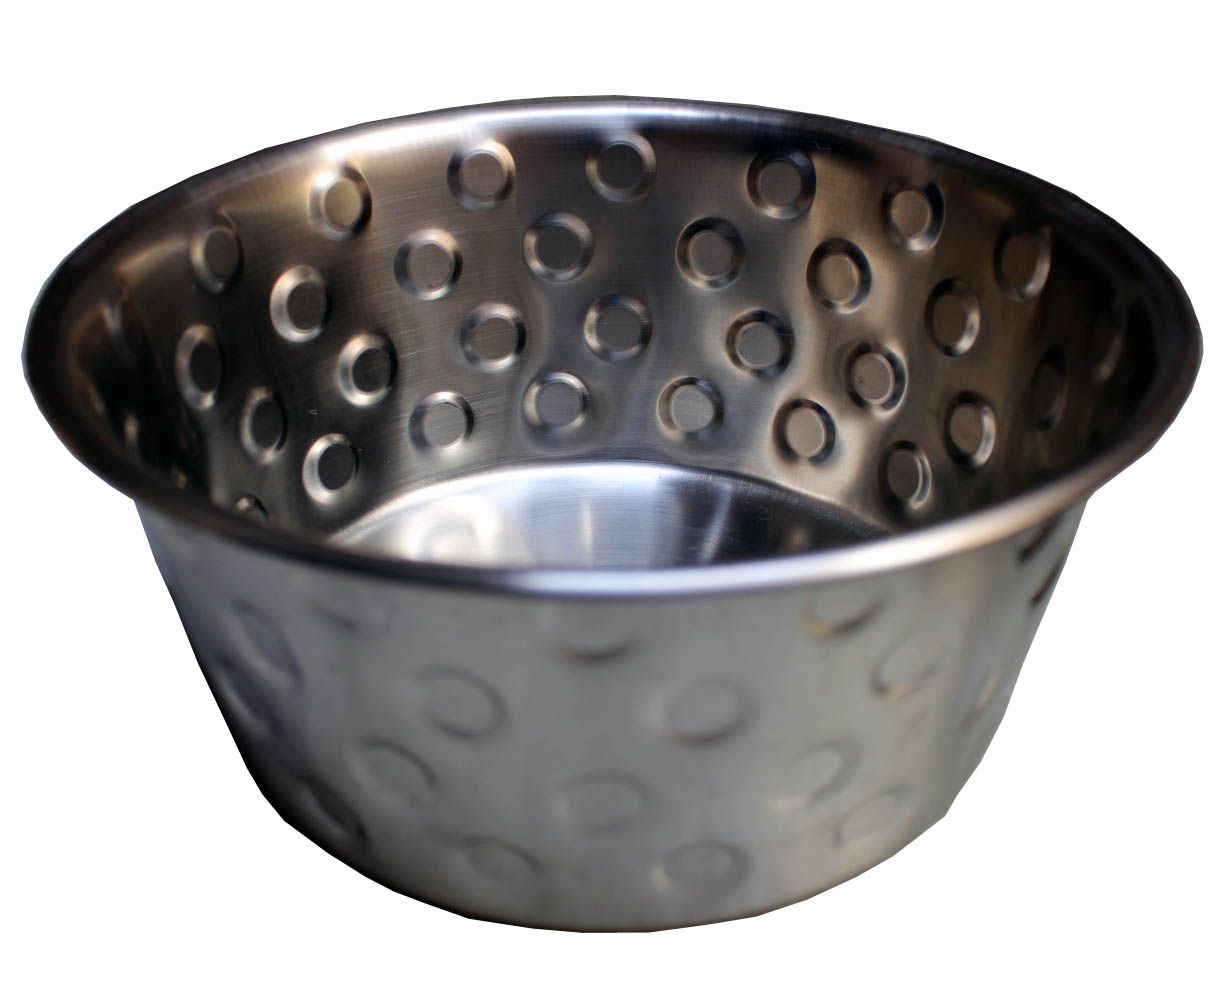     			Petshop7.com - Stainless Steel Dog Food Silver Bowl 500 mL